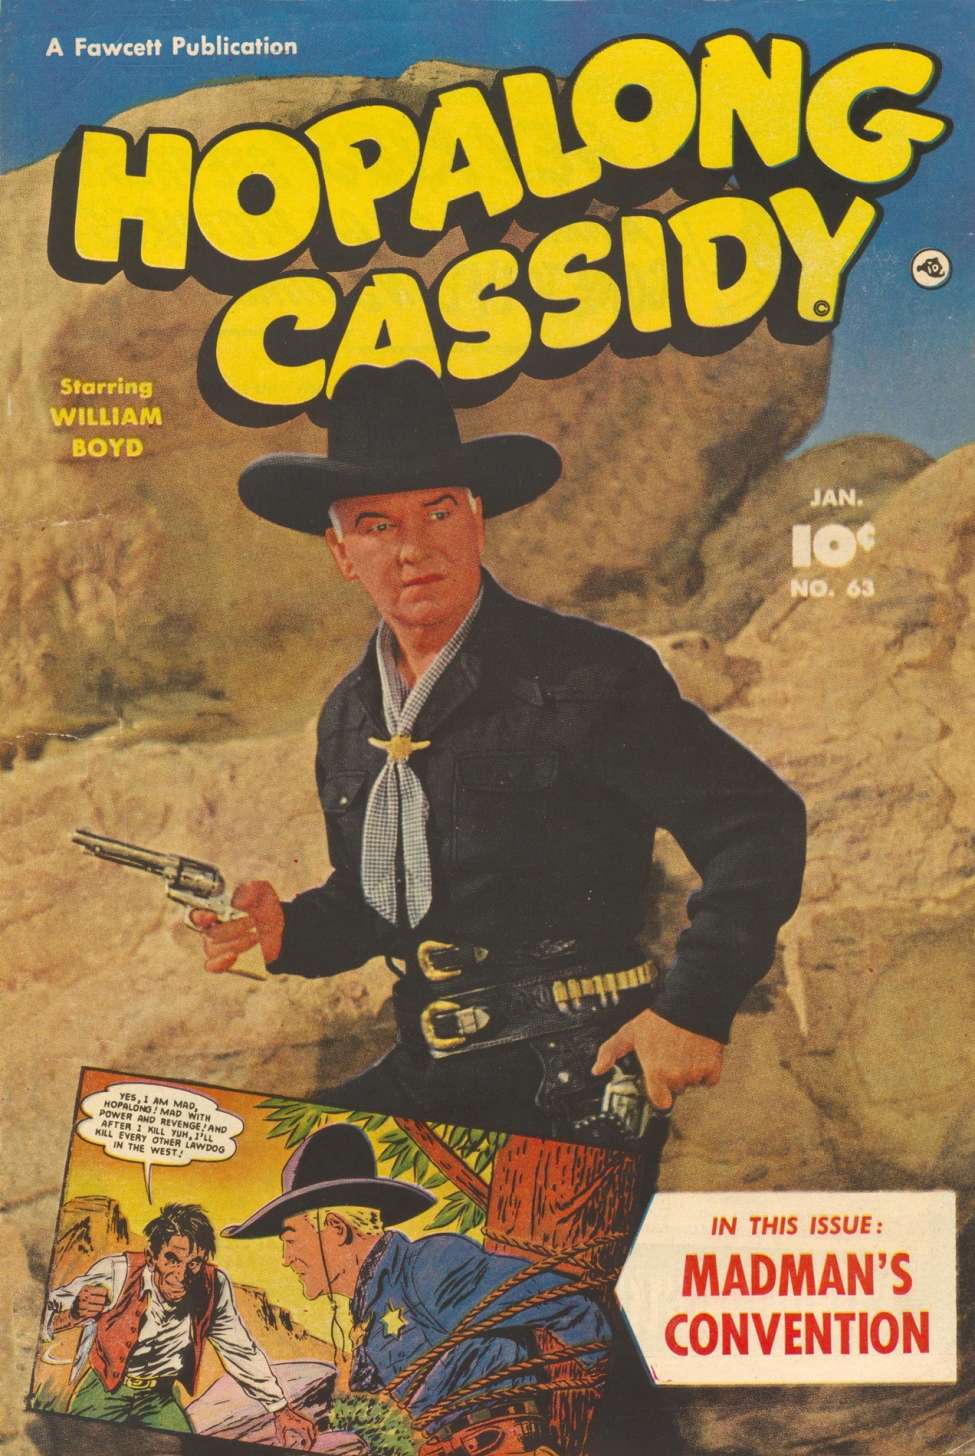 Book Cover For Hopalong Cassidy 63 - Version 2